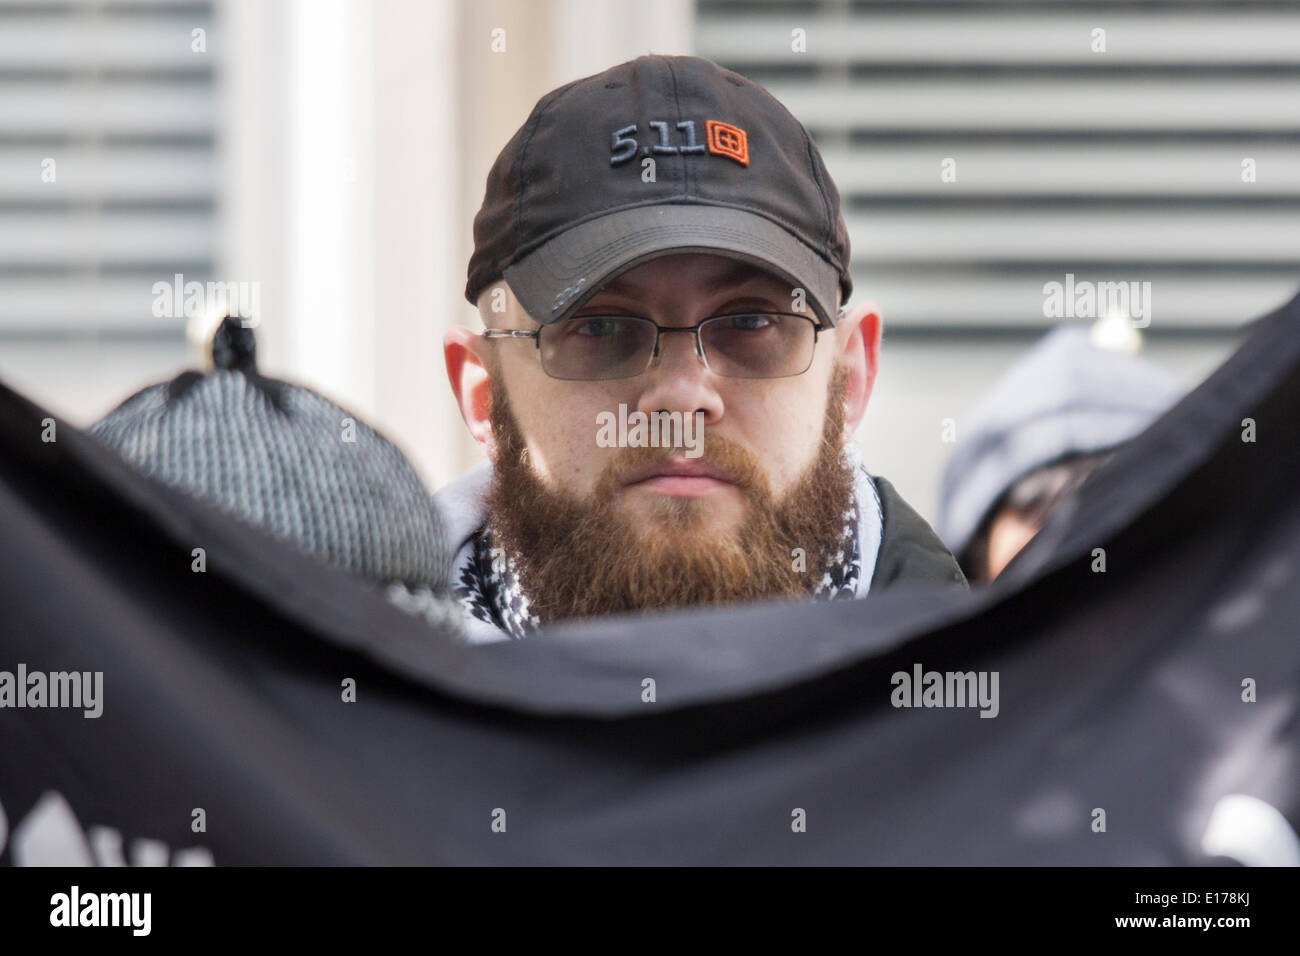 London, UK. May 25th 2014. Radical Islamists protest at the Lebanese embassy in London against the arrest in Lebanon earlier in the day of fundamentalist scholar Sheikh Omar Bakri Muhammad. Credit:  Paul Davey/Alamy Live News Stock Photo